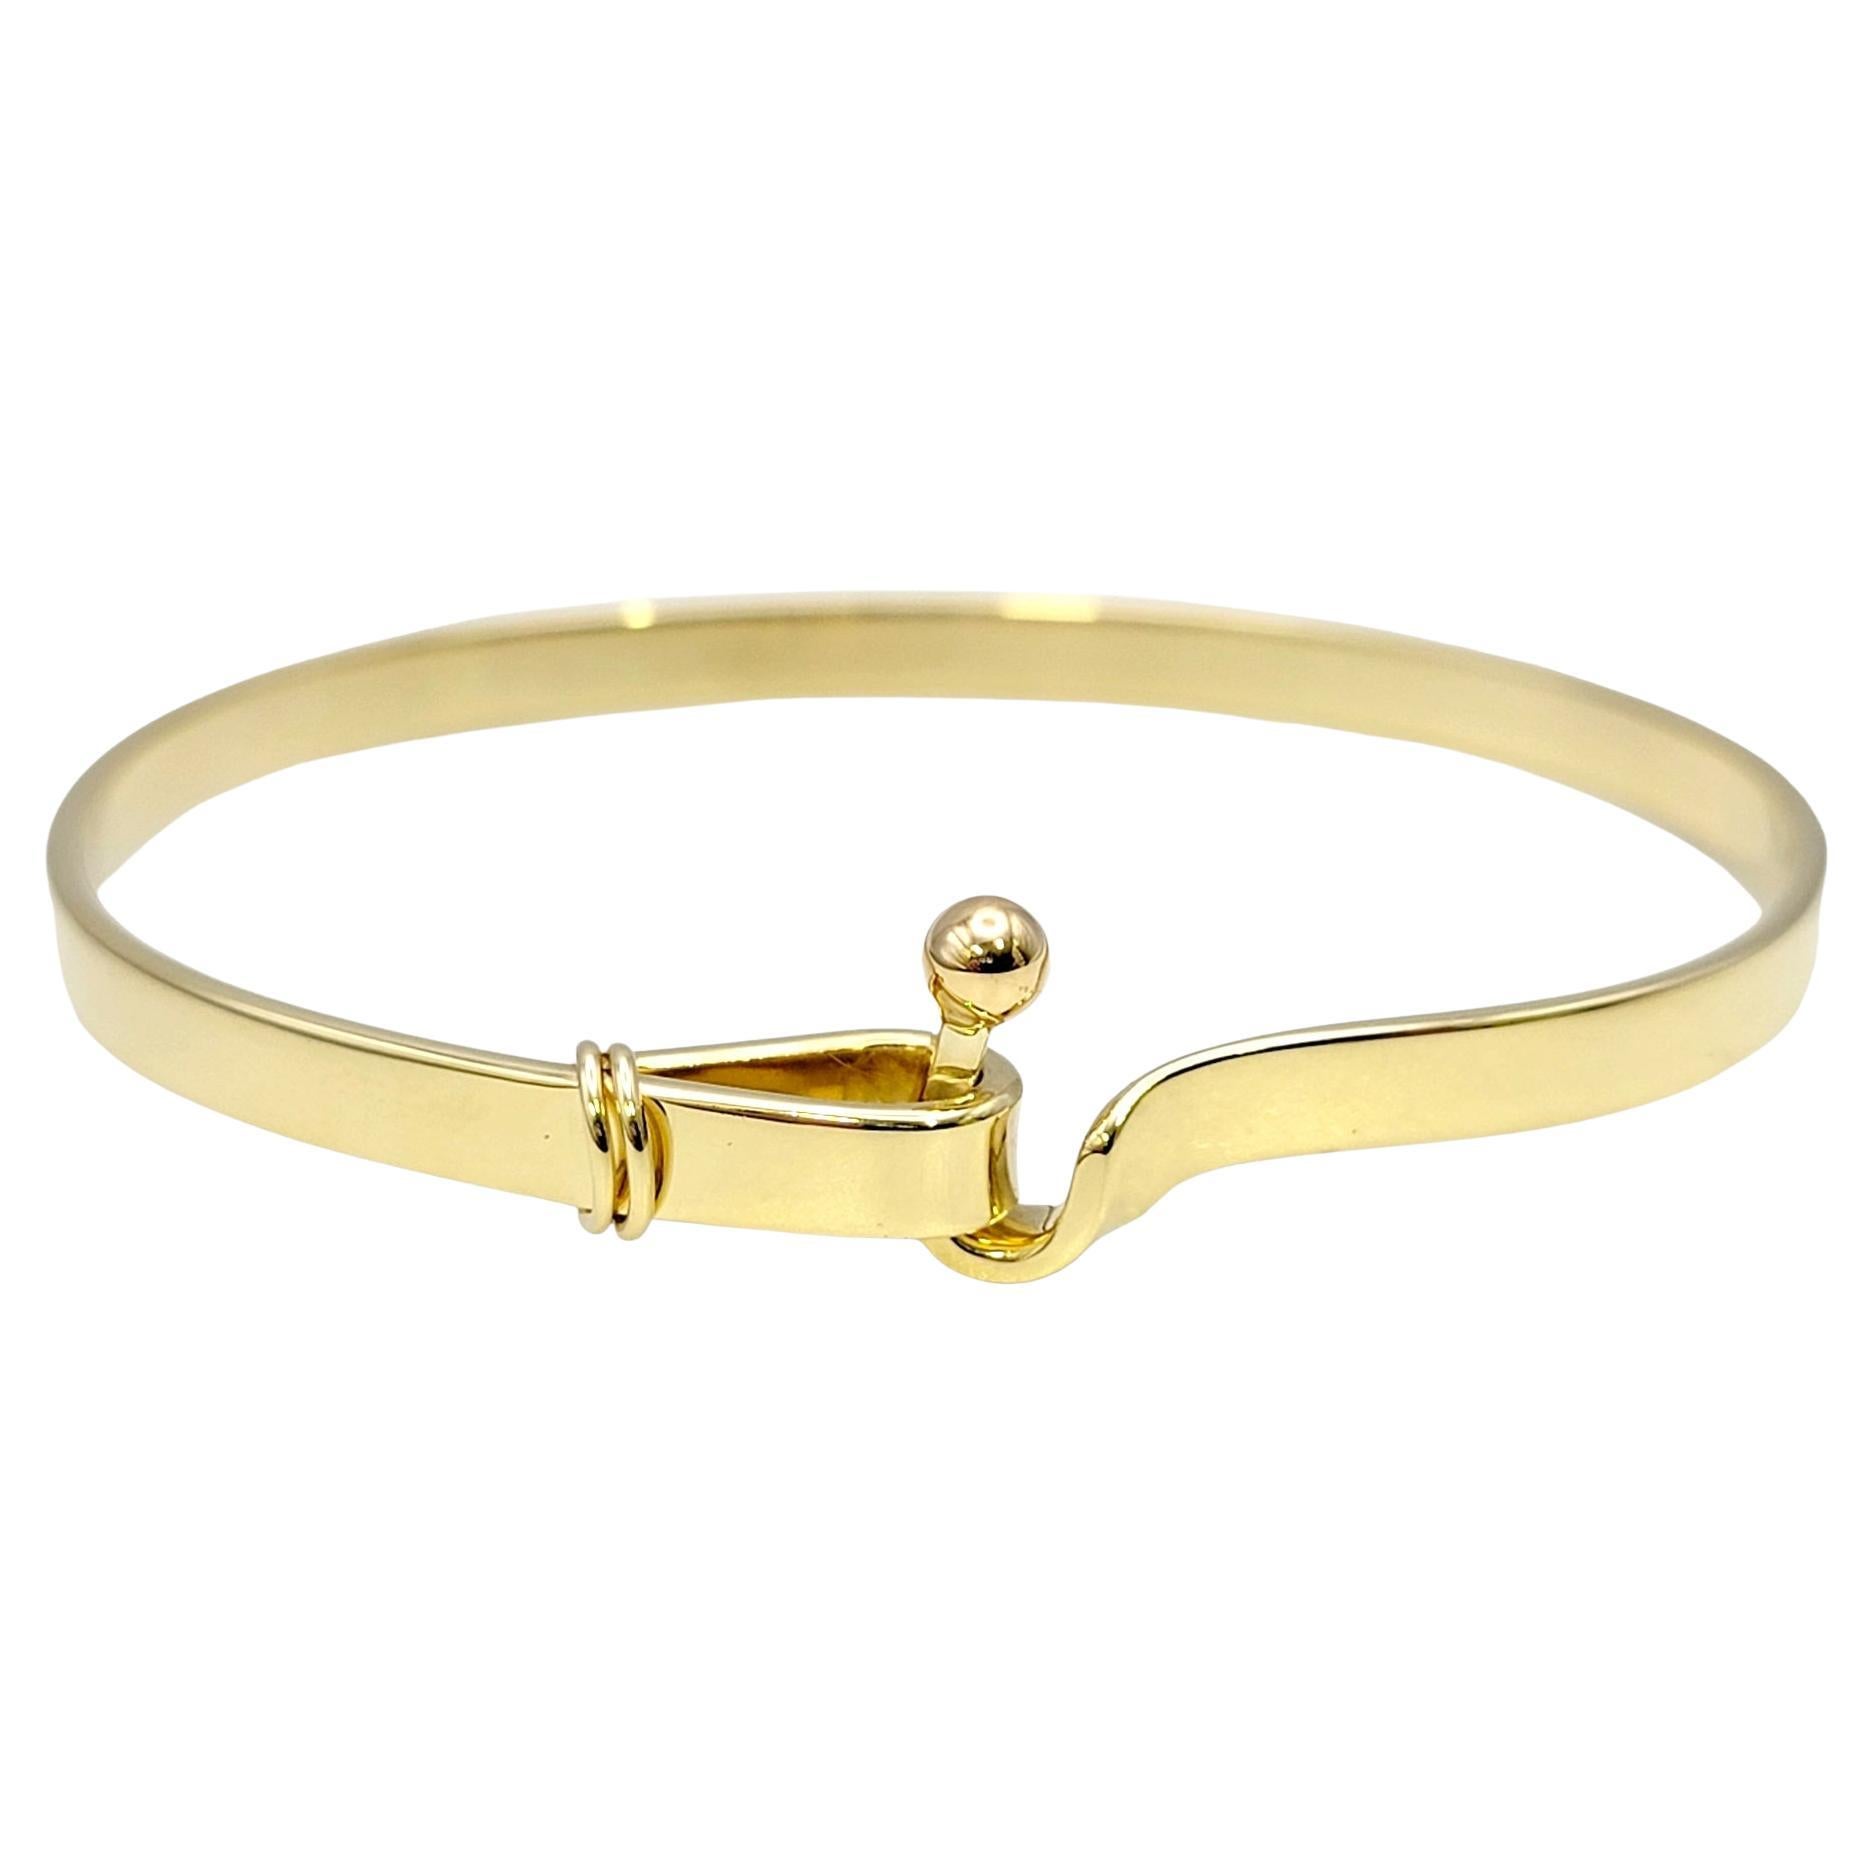 Contemporary elegance is at its finest with this sleek and stunning Tiffany & Co. hook and eye bangle bracelet. Founded in 1837 in New York City, Tiffany & Co. is one of the world's most storied luxury design houses recognized globally for its